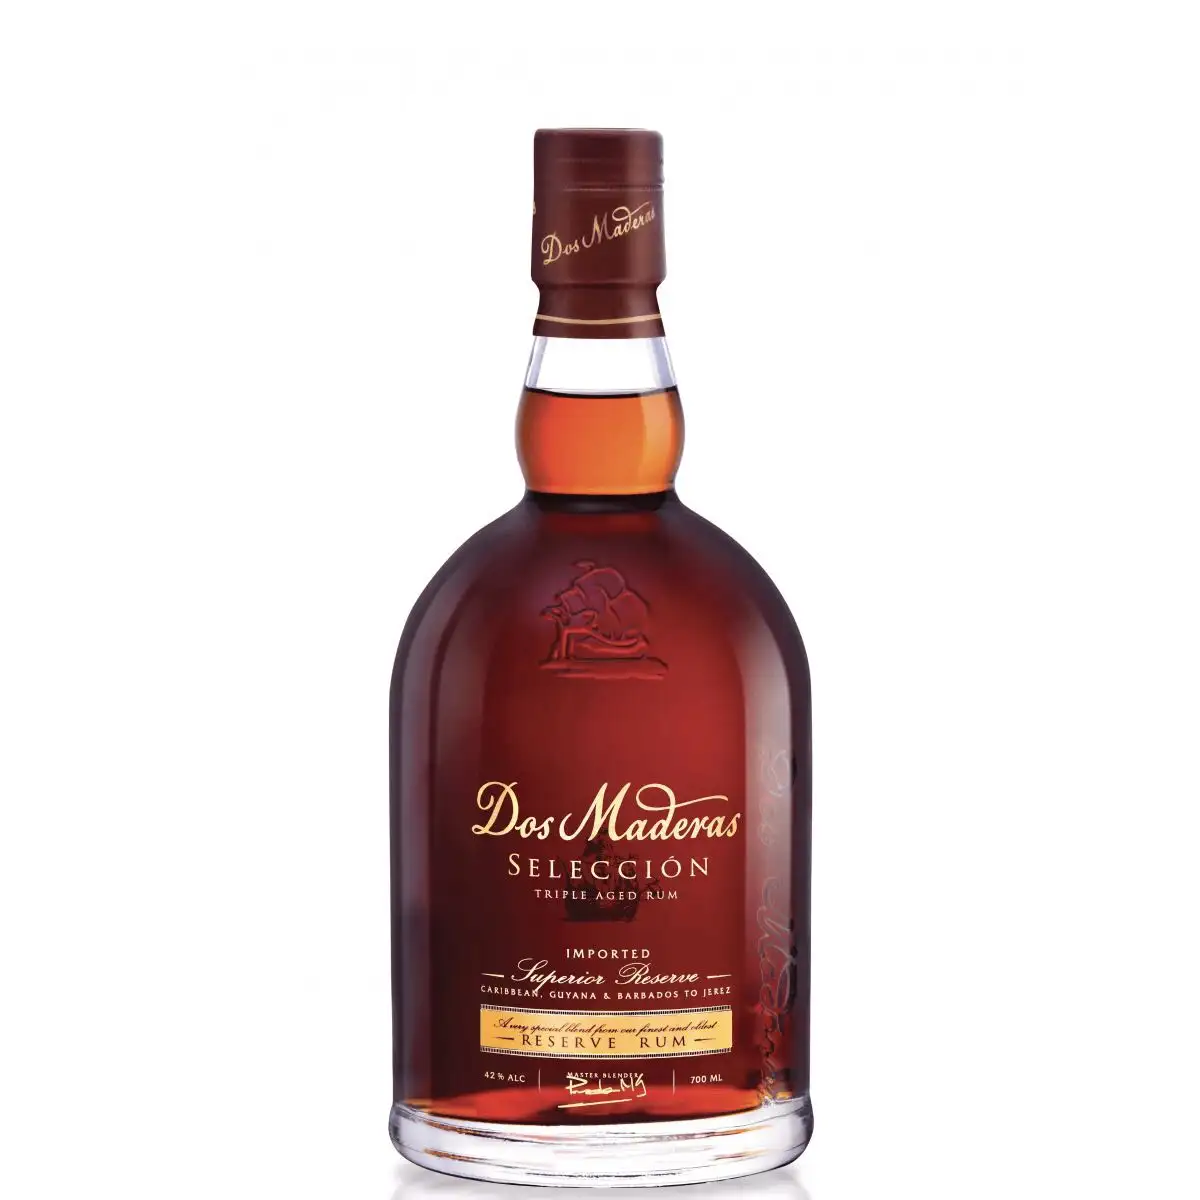 Image of the front of the bottle of the rum Dos Maderas Seleccion